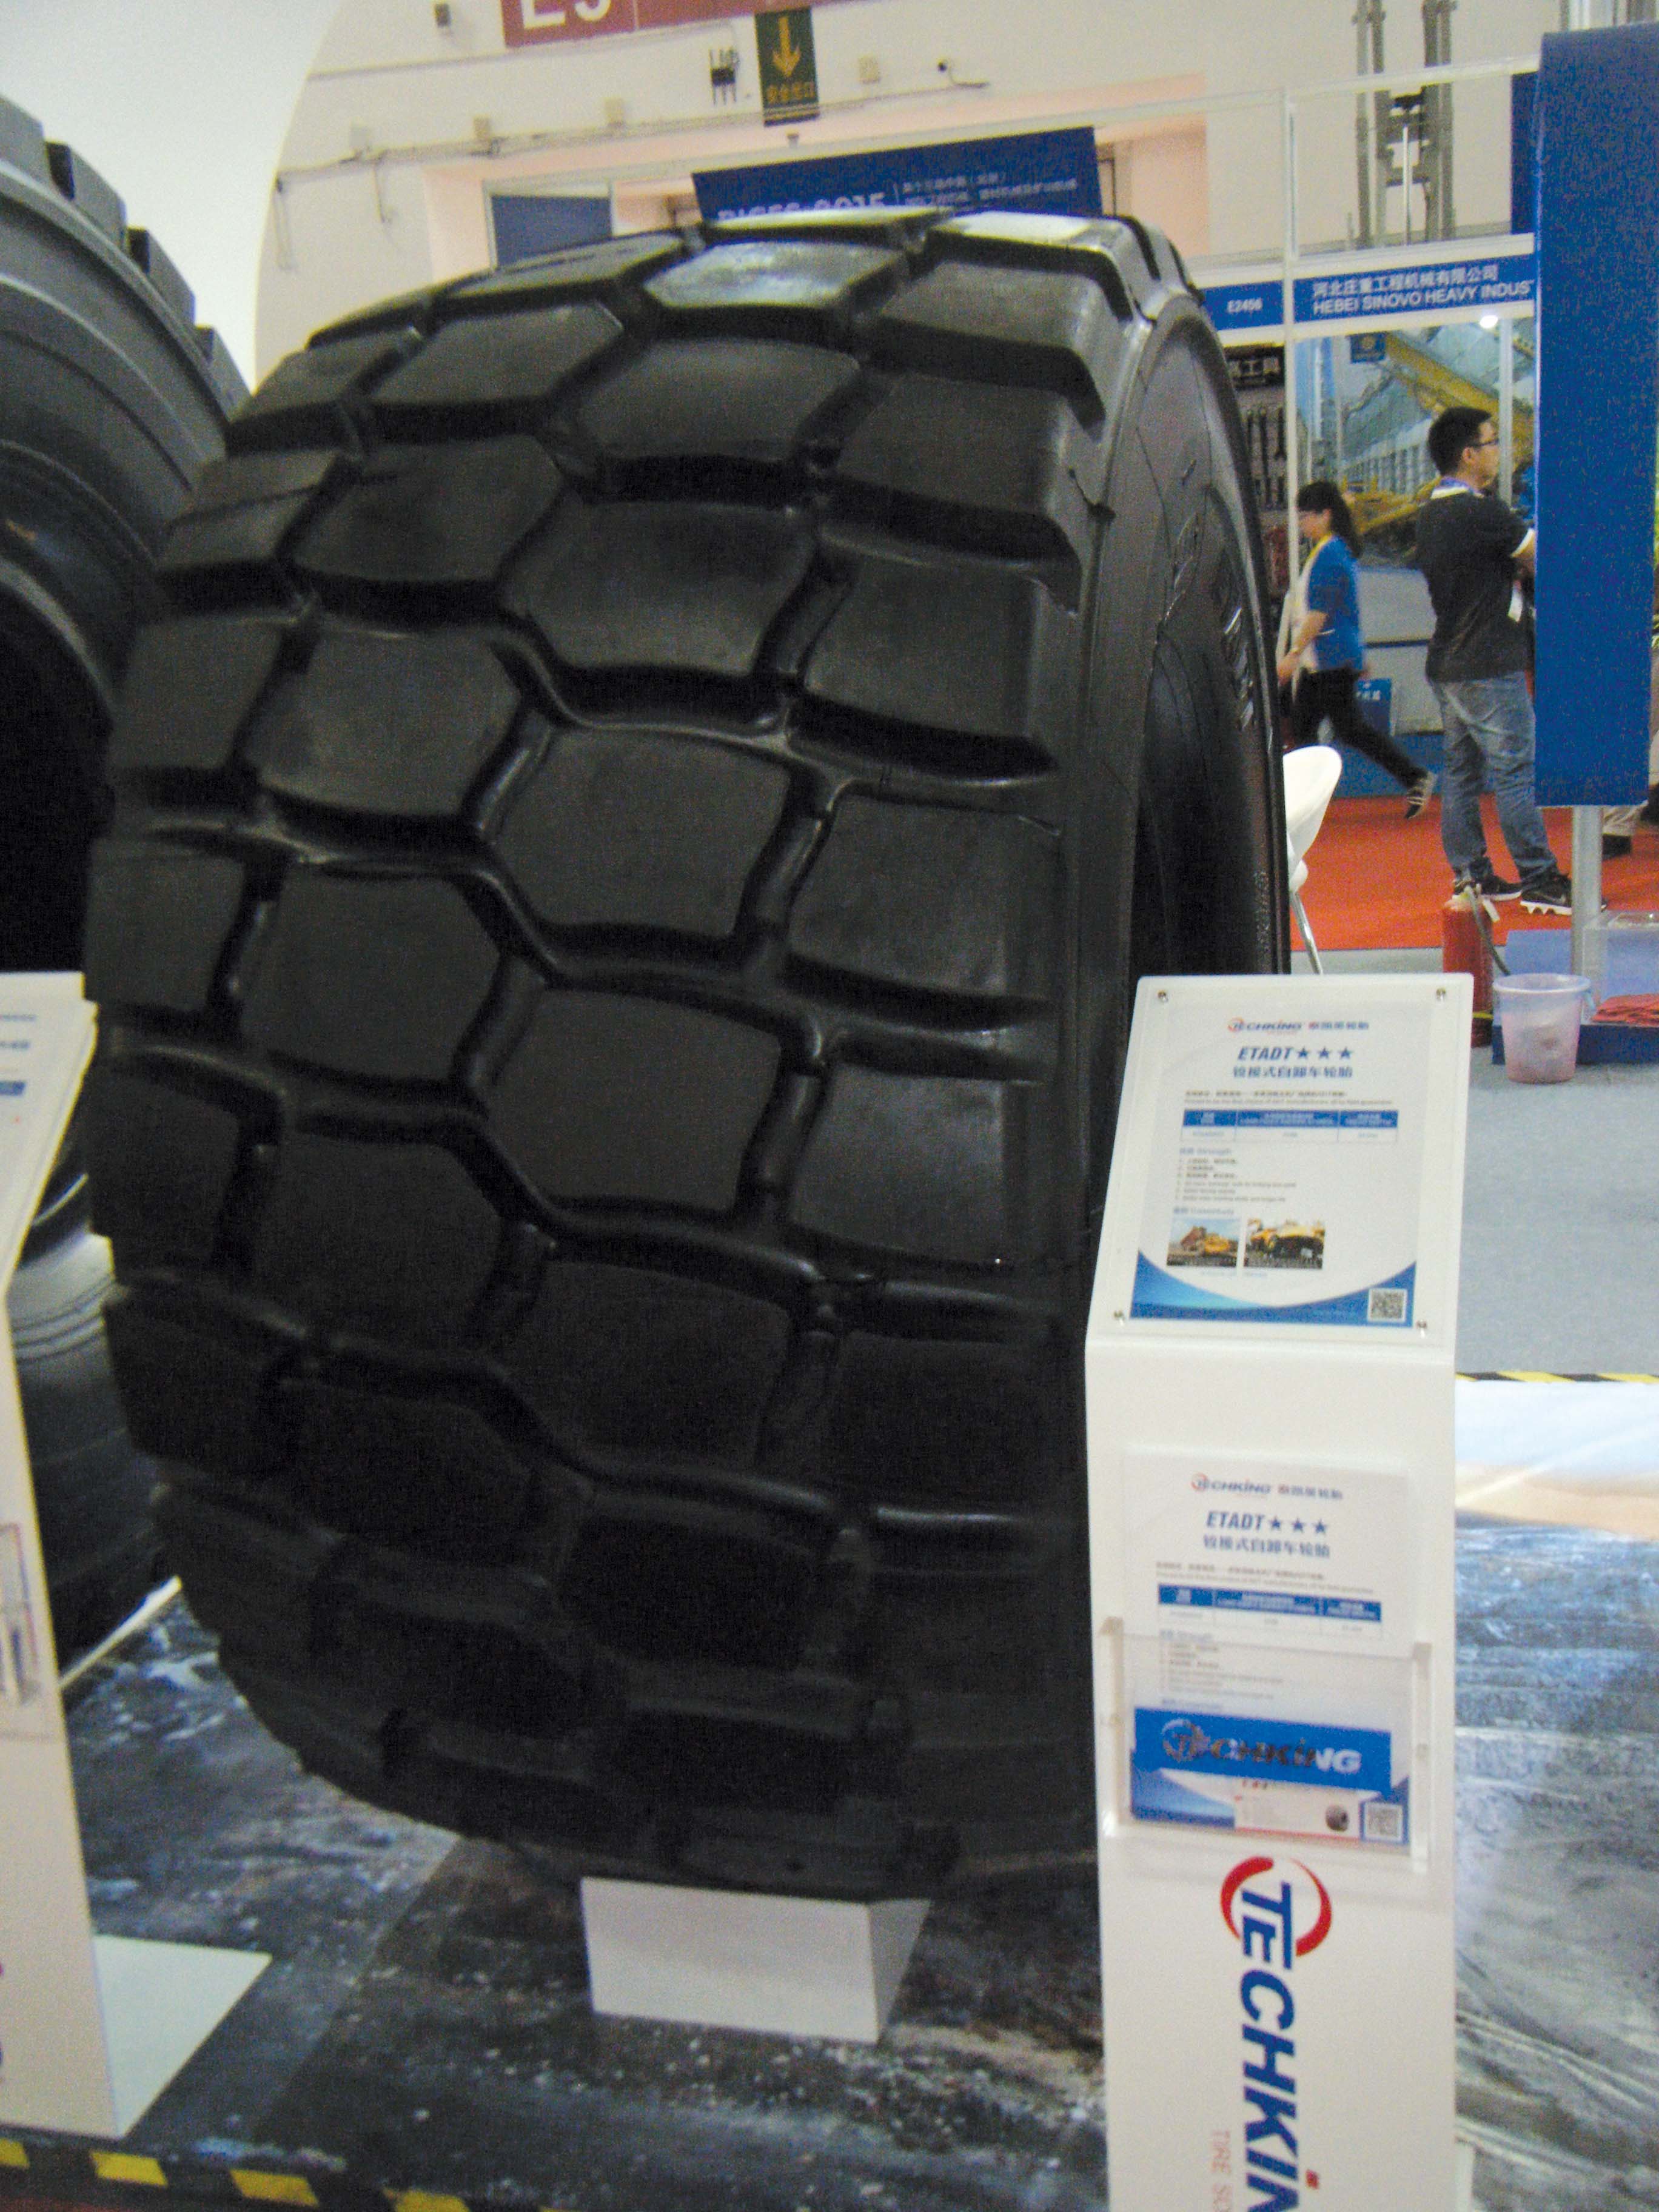 Techking low-profile ADT tyre